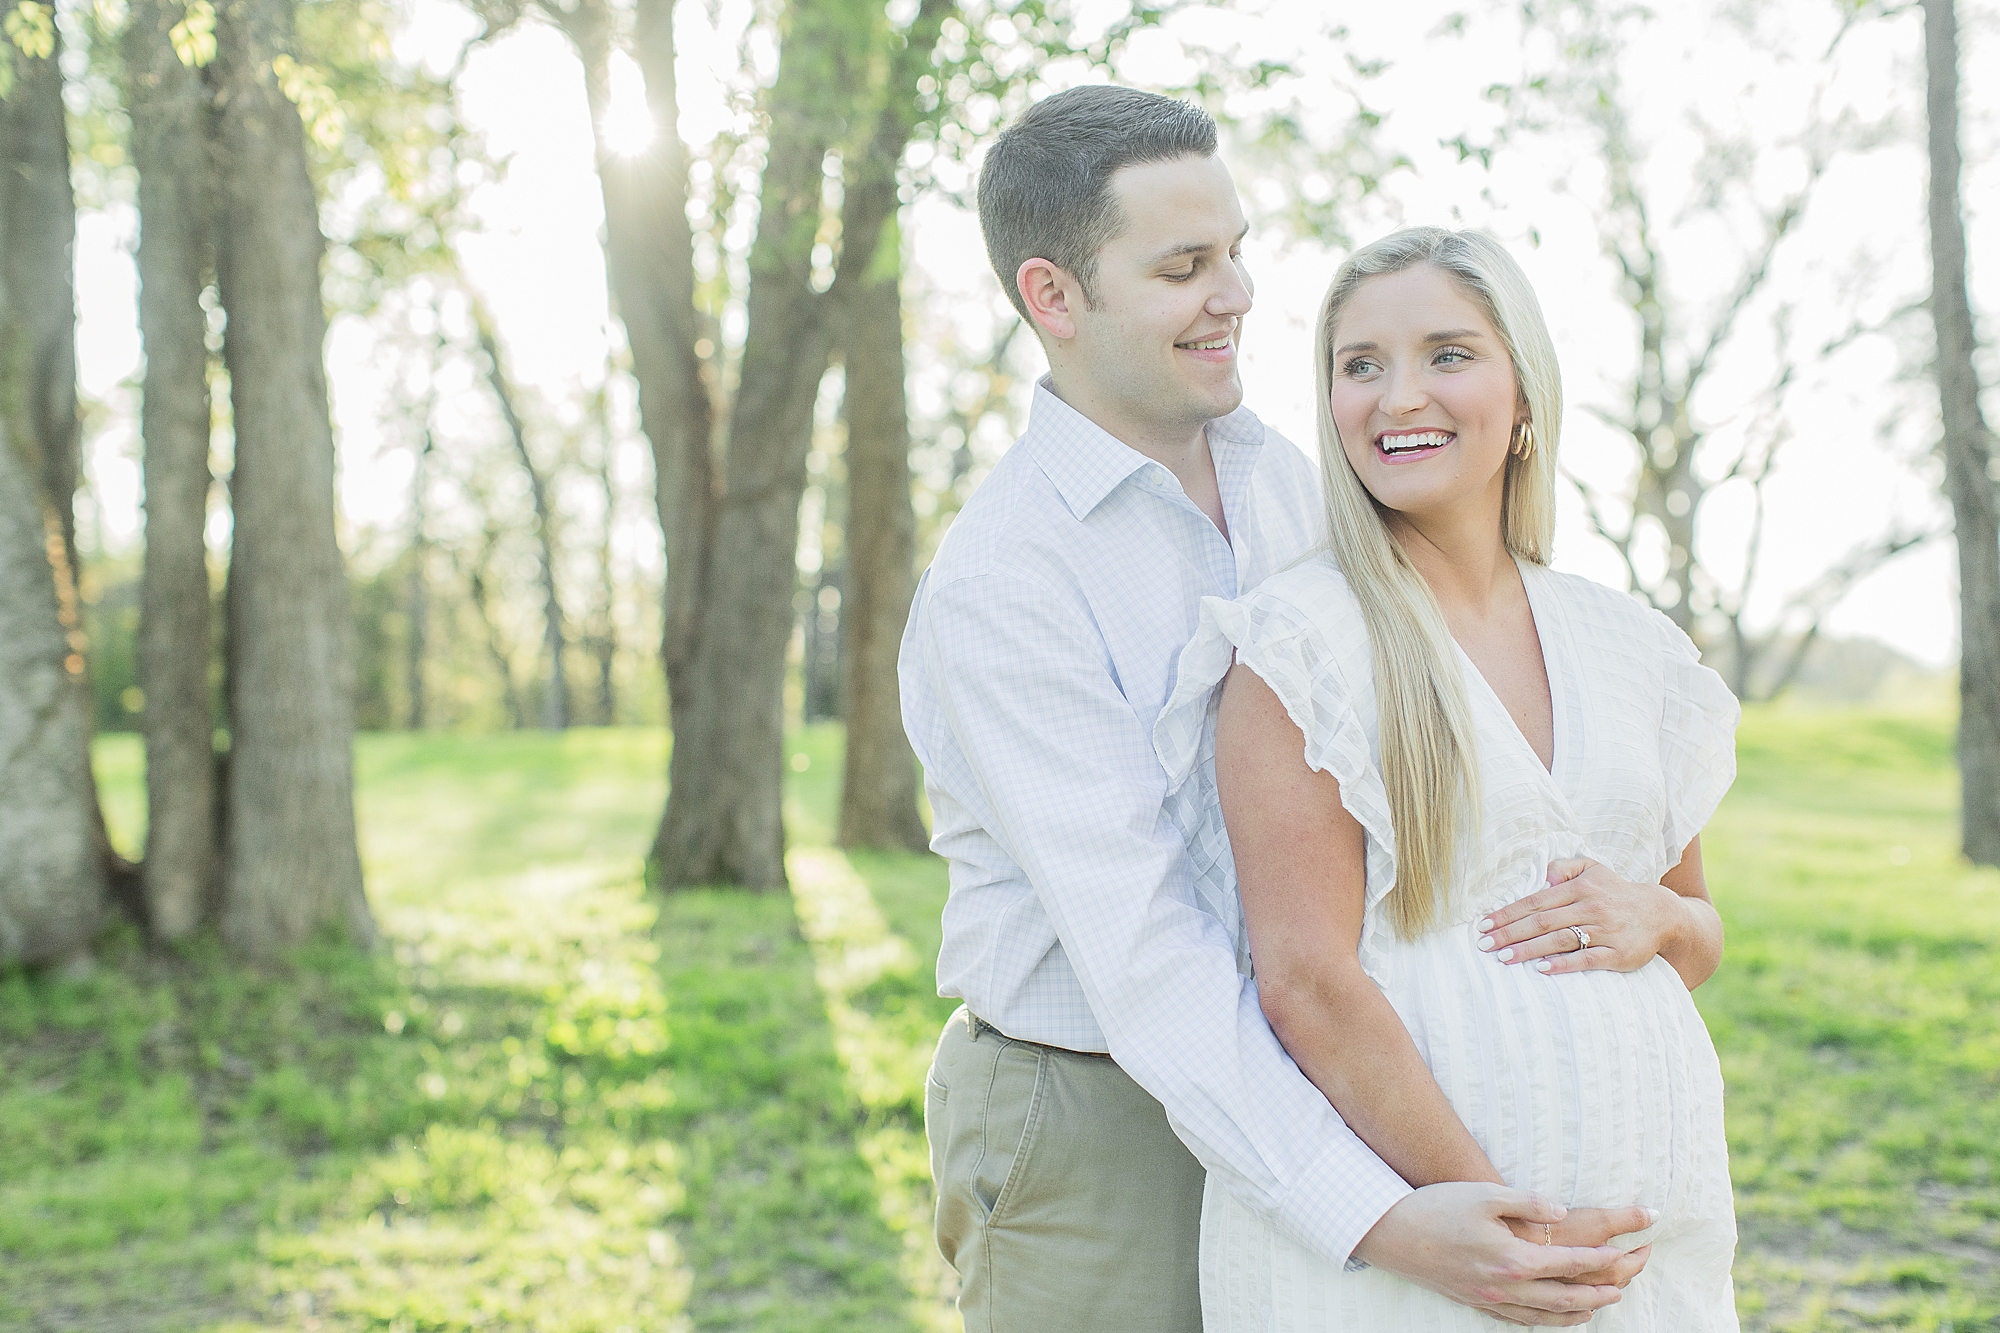 Madison, Mississippi baby announcement photos